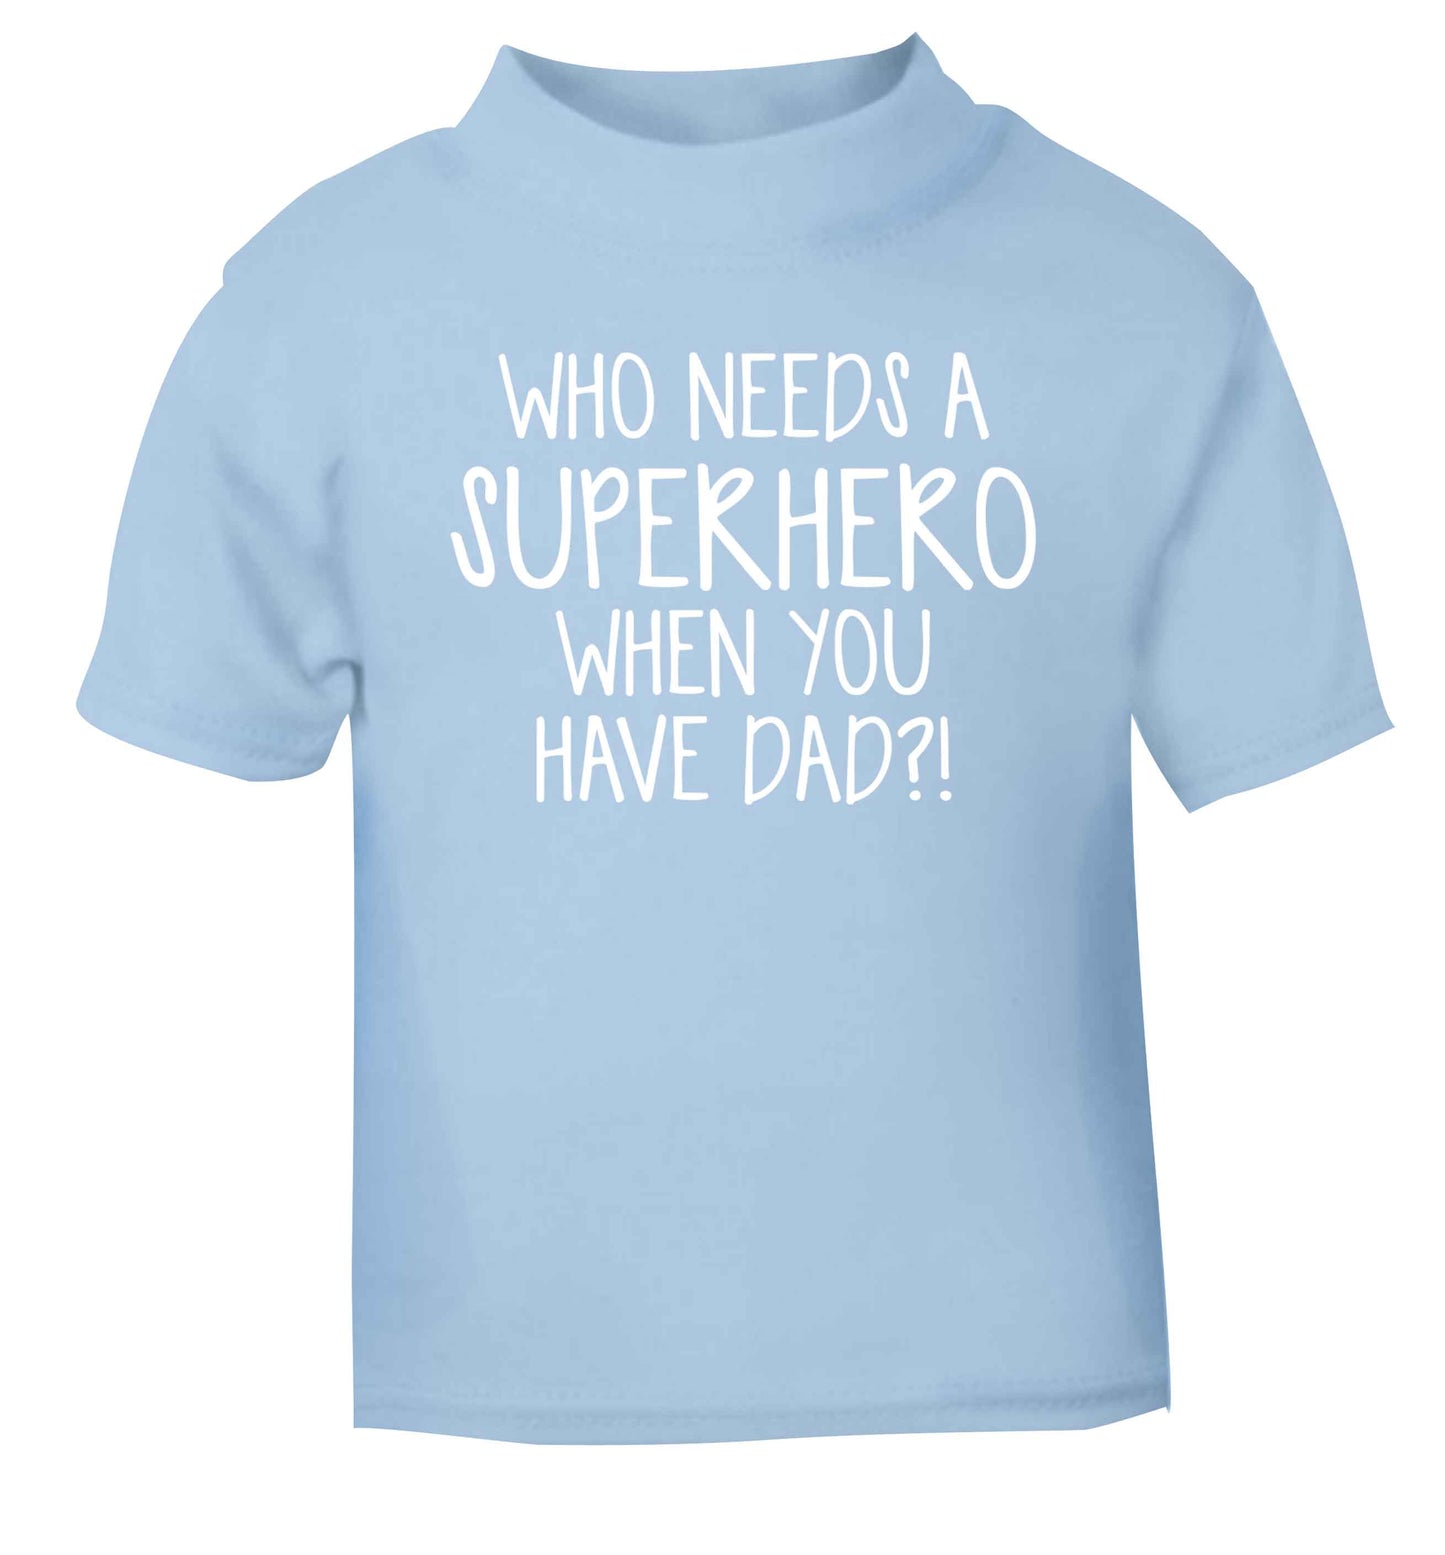 Who needs a superhero when you have dad! light blue baby toddler Tshirt 2 Years